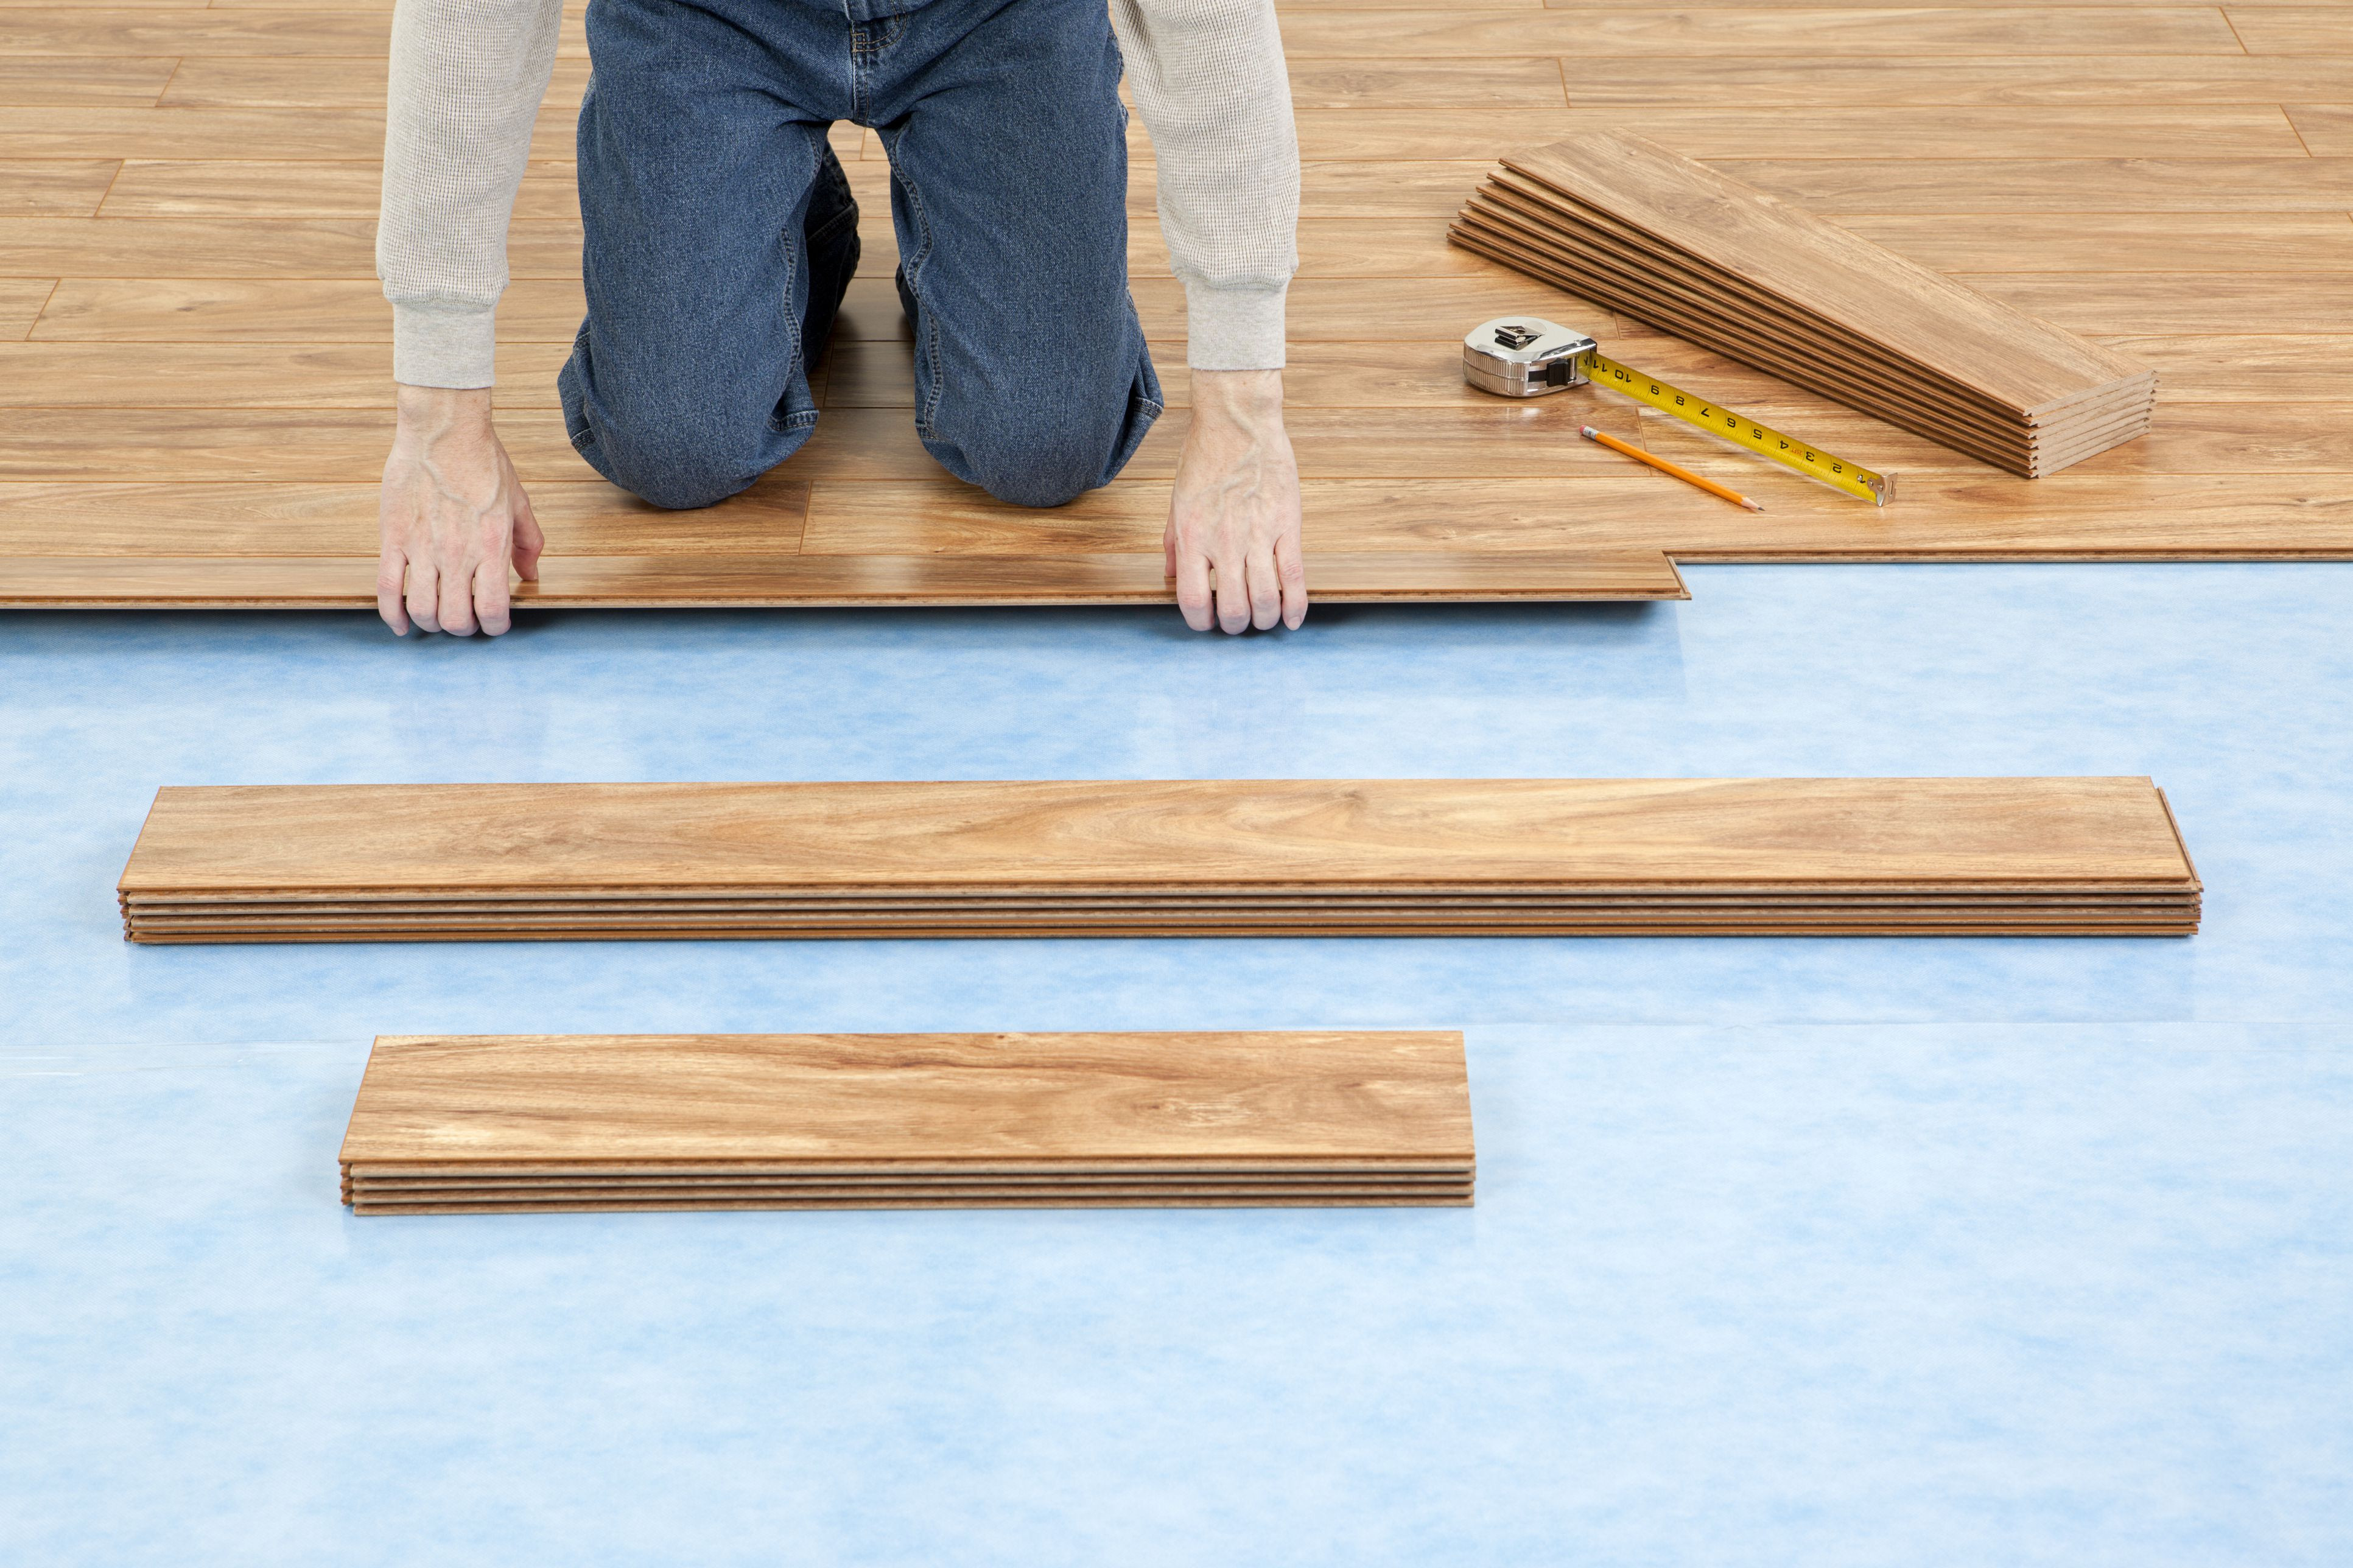 Floating Hardwood Floor Padding Of Installing Laminate Flooring with attached Underlayment for New Floor Installation 155283725 582735c03df78c6f6af8ac80